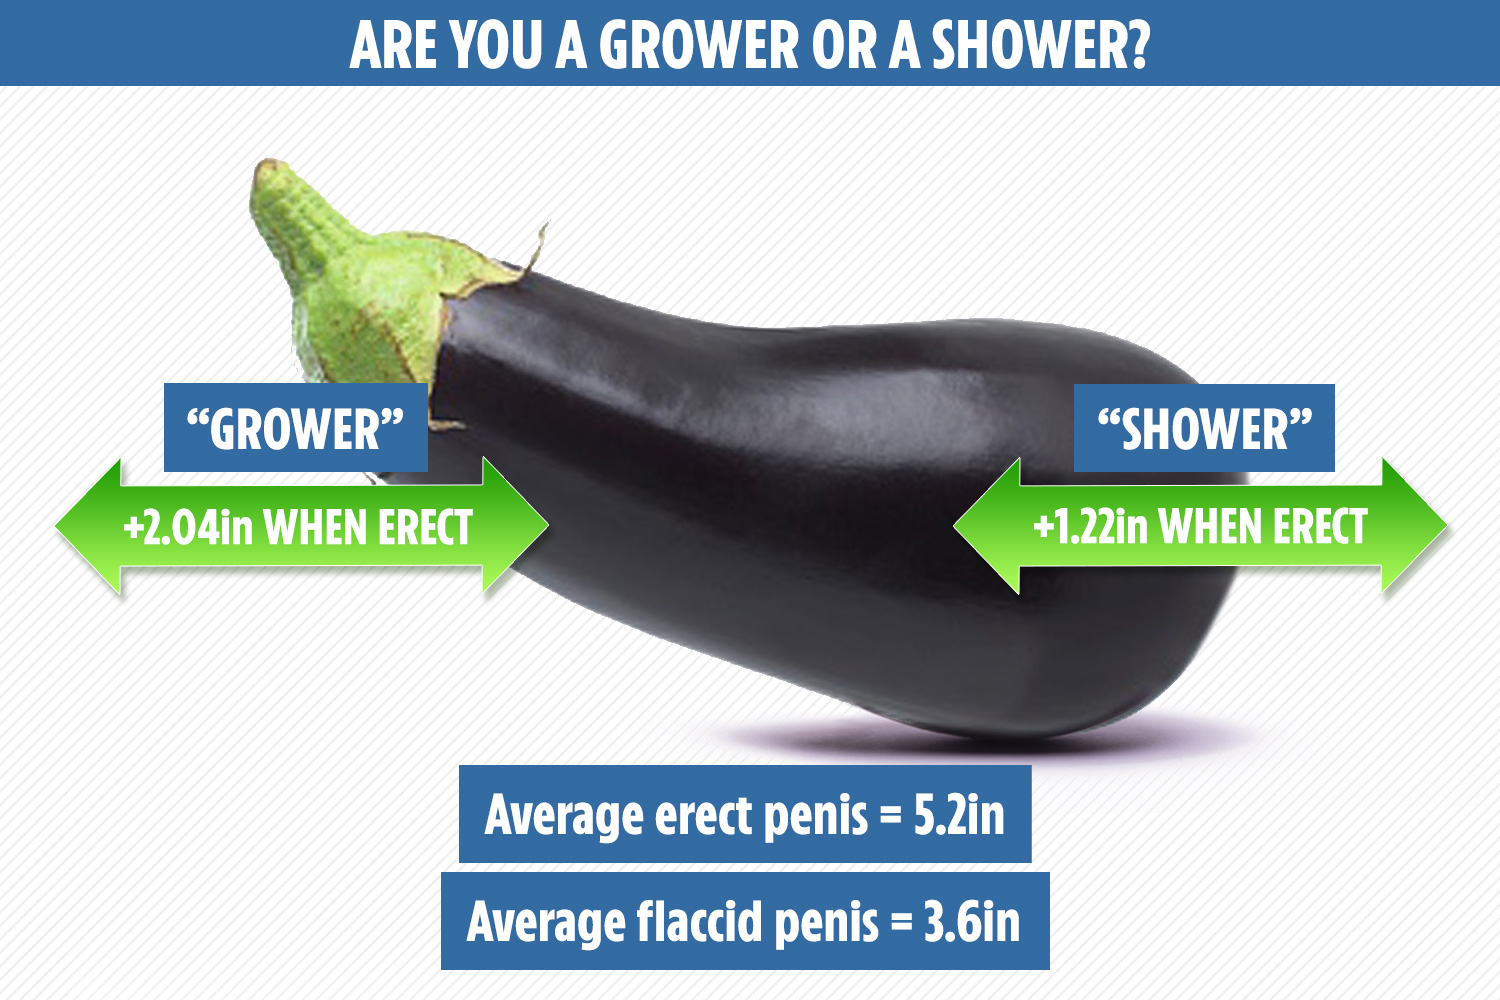 amol sharma recommends shower and grower pictures pic